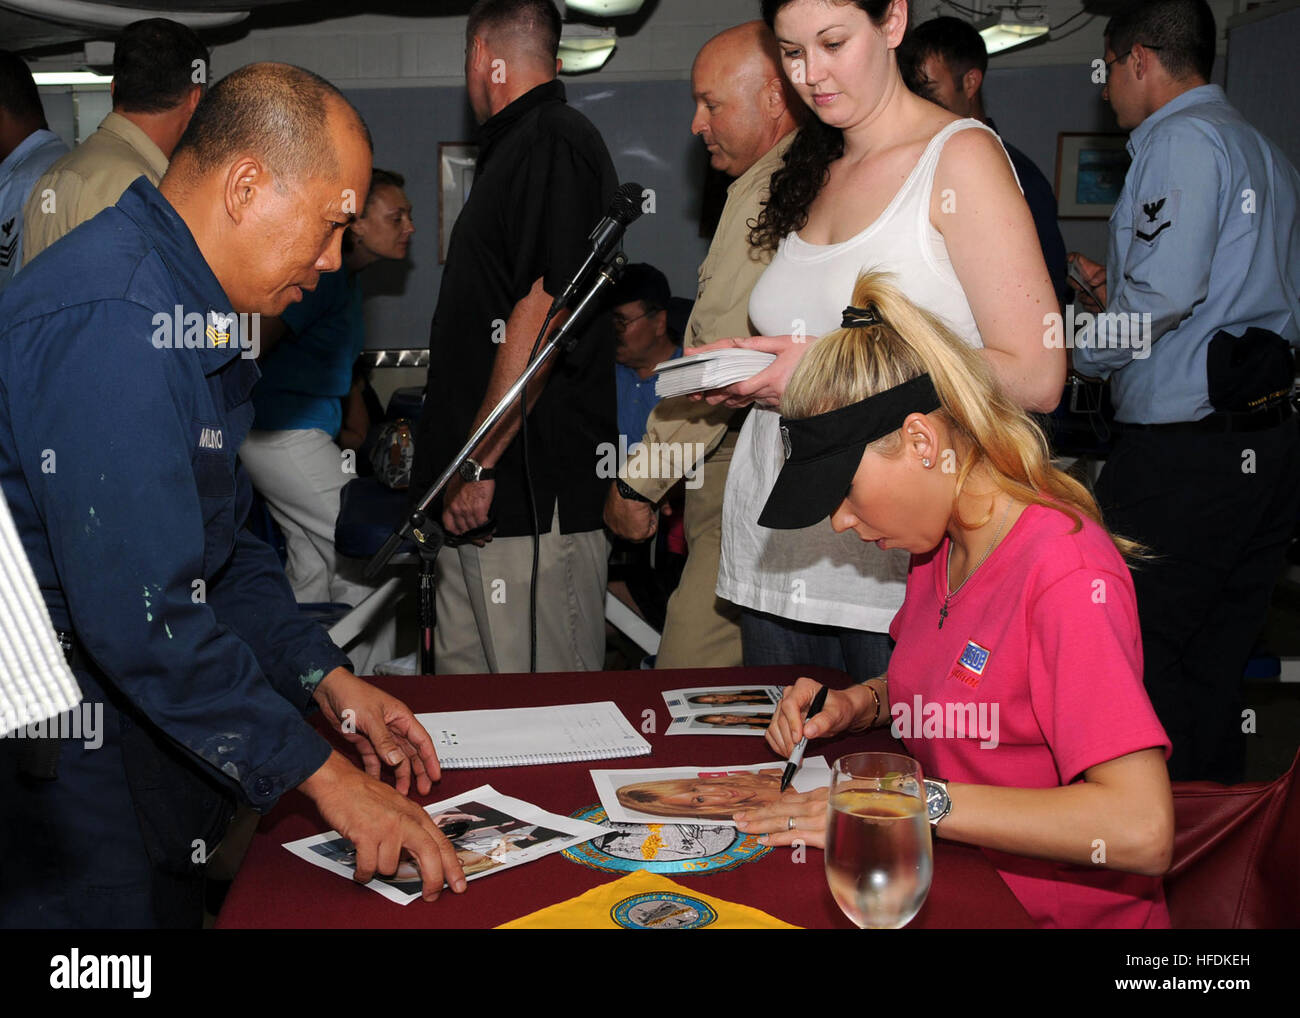 081031-N-1722W-068 Polaris Point, Guam (Oct. 31, 2008) Renowned tennis player and model, Anna Kournikova, signs autographs for Machinist's Repairman 1st Class Reynaldo Milano aboard USS Frank Cable (AS 40). Kournikova's visit to the ship was part of a weeklong trip and USO Goodwill Tour to Guam visiting troops, local groups and their children. (U.S. Navy photoMass Communication Specialist Seaman Trevor Welsh/Released) Anna Kournikova visits Sailors in Guam 125831 Stock Photo